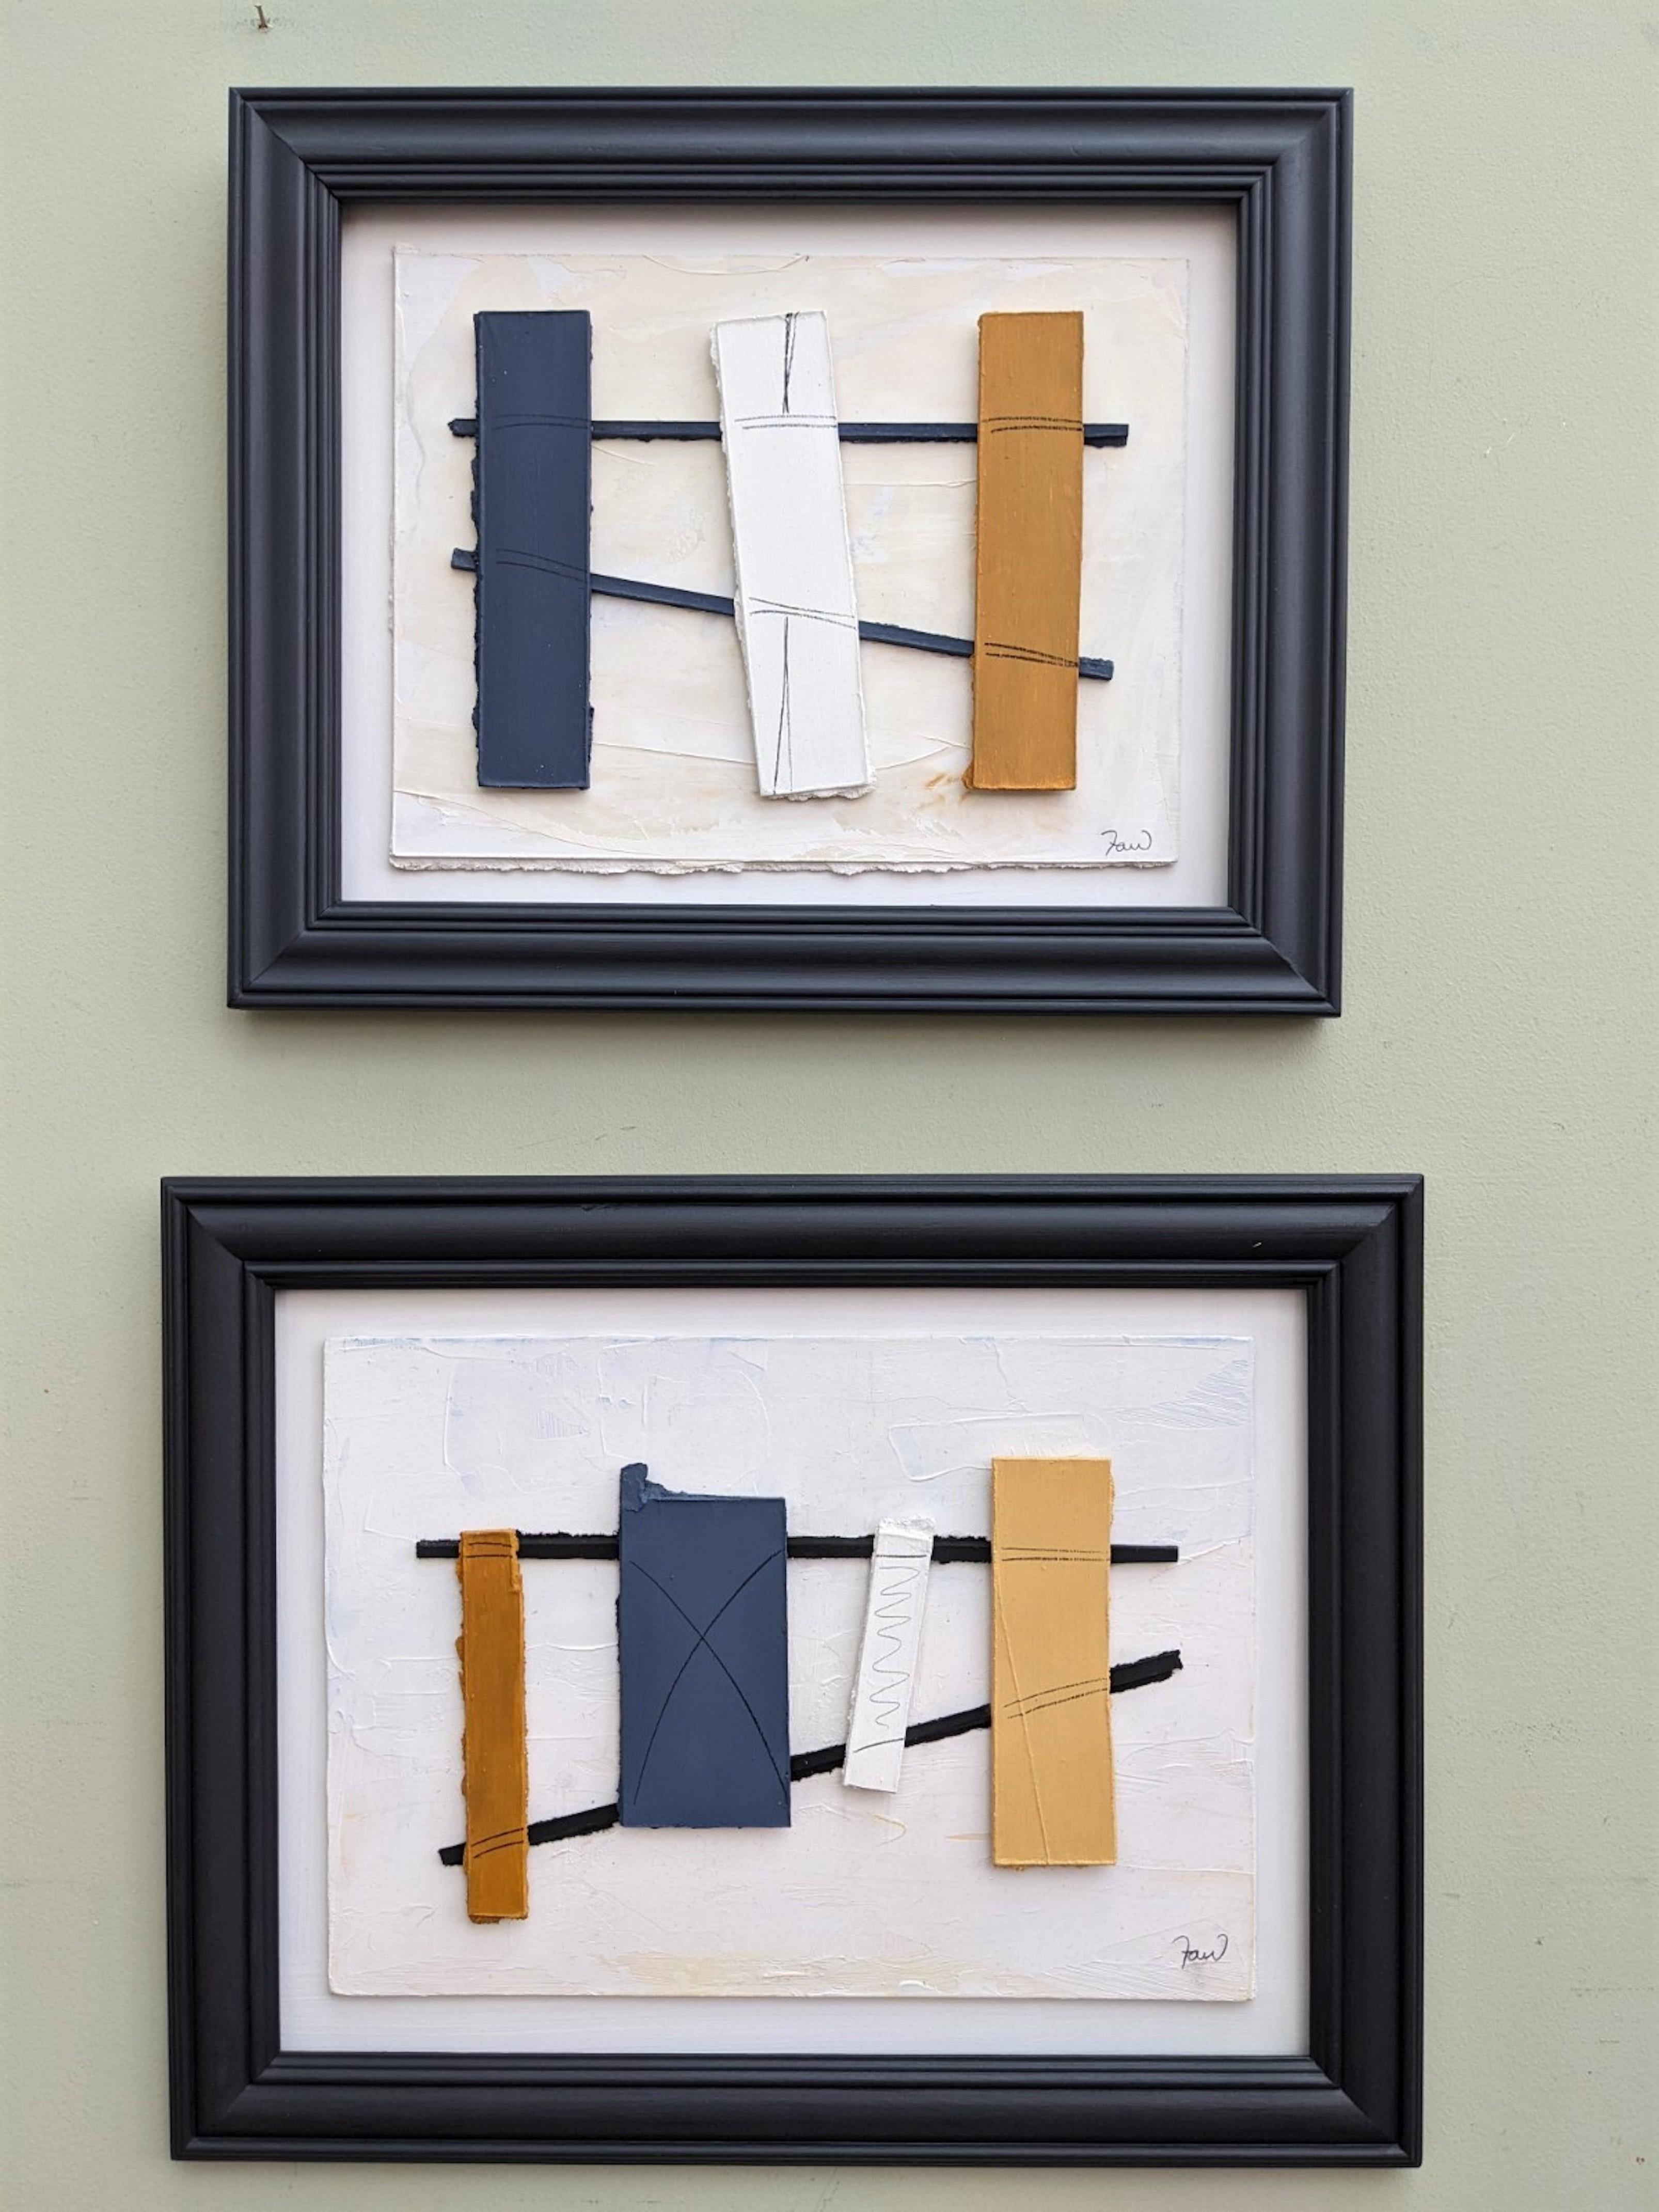 CONSTRUCTION 2
Size: 38 x 48 cm (including frame)
Oil relief on hardboard

This modernist ‘constructivist’ three dimensional work features cut out panels that have been painted in oil and assembled. The artist has used stripped down, geometric forms